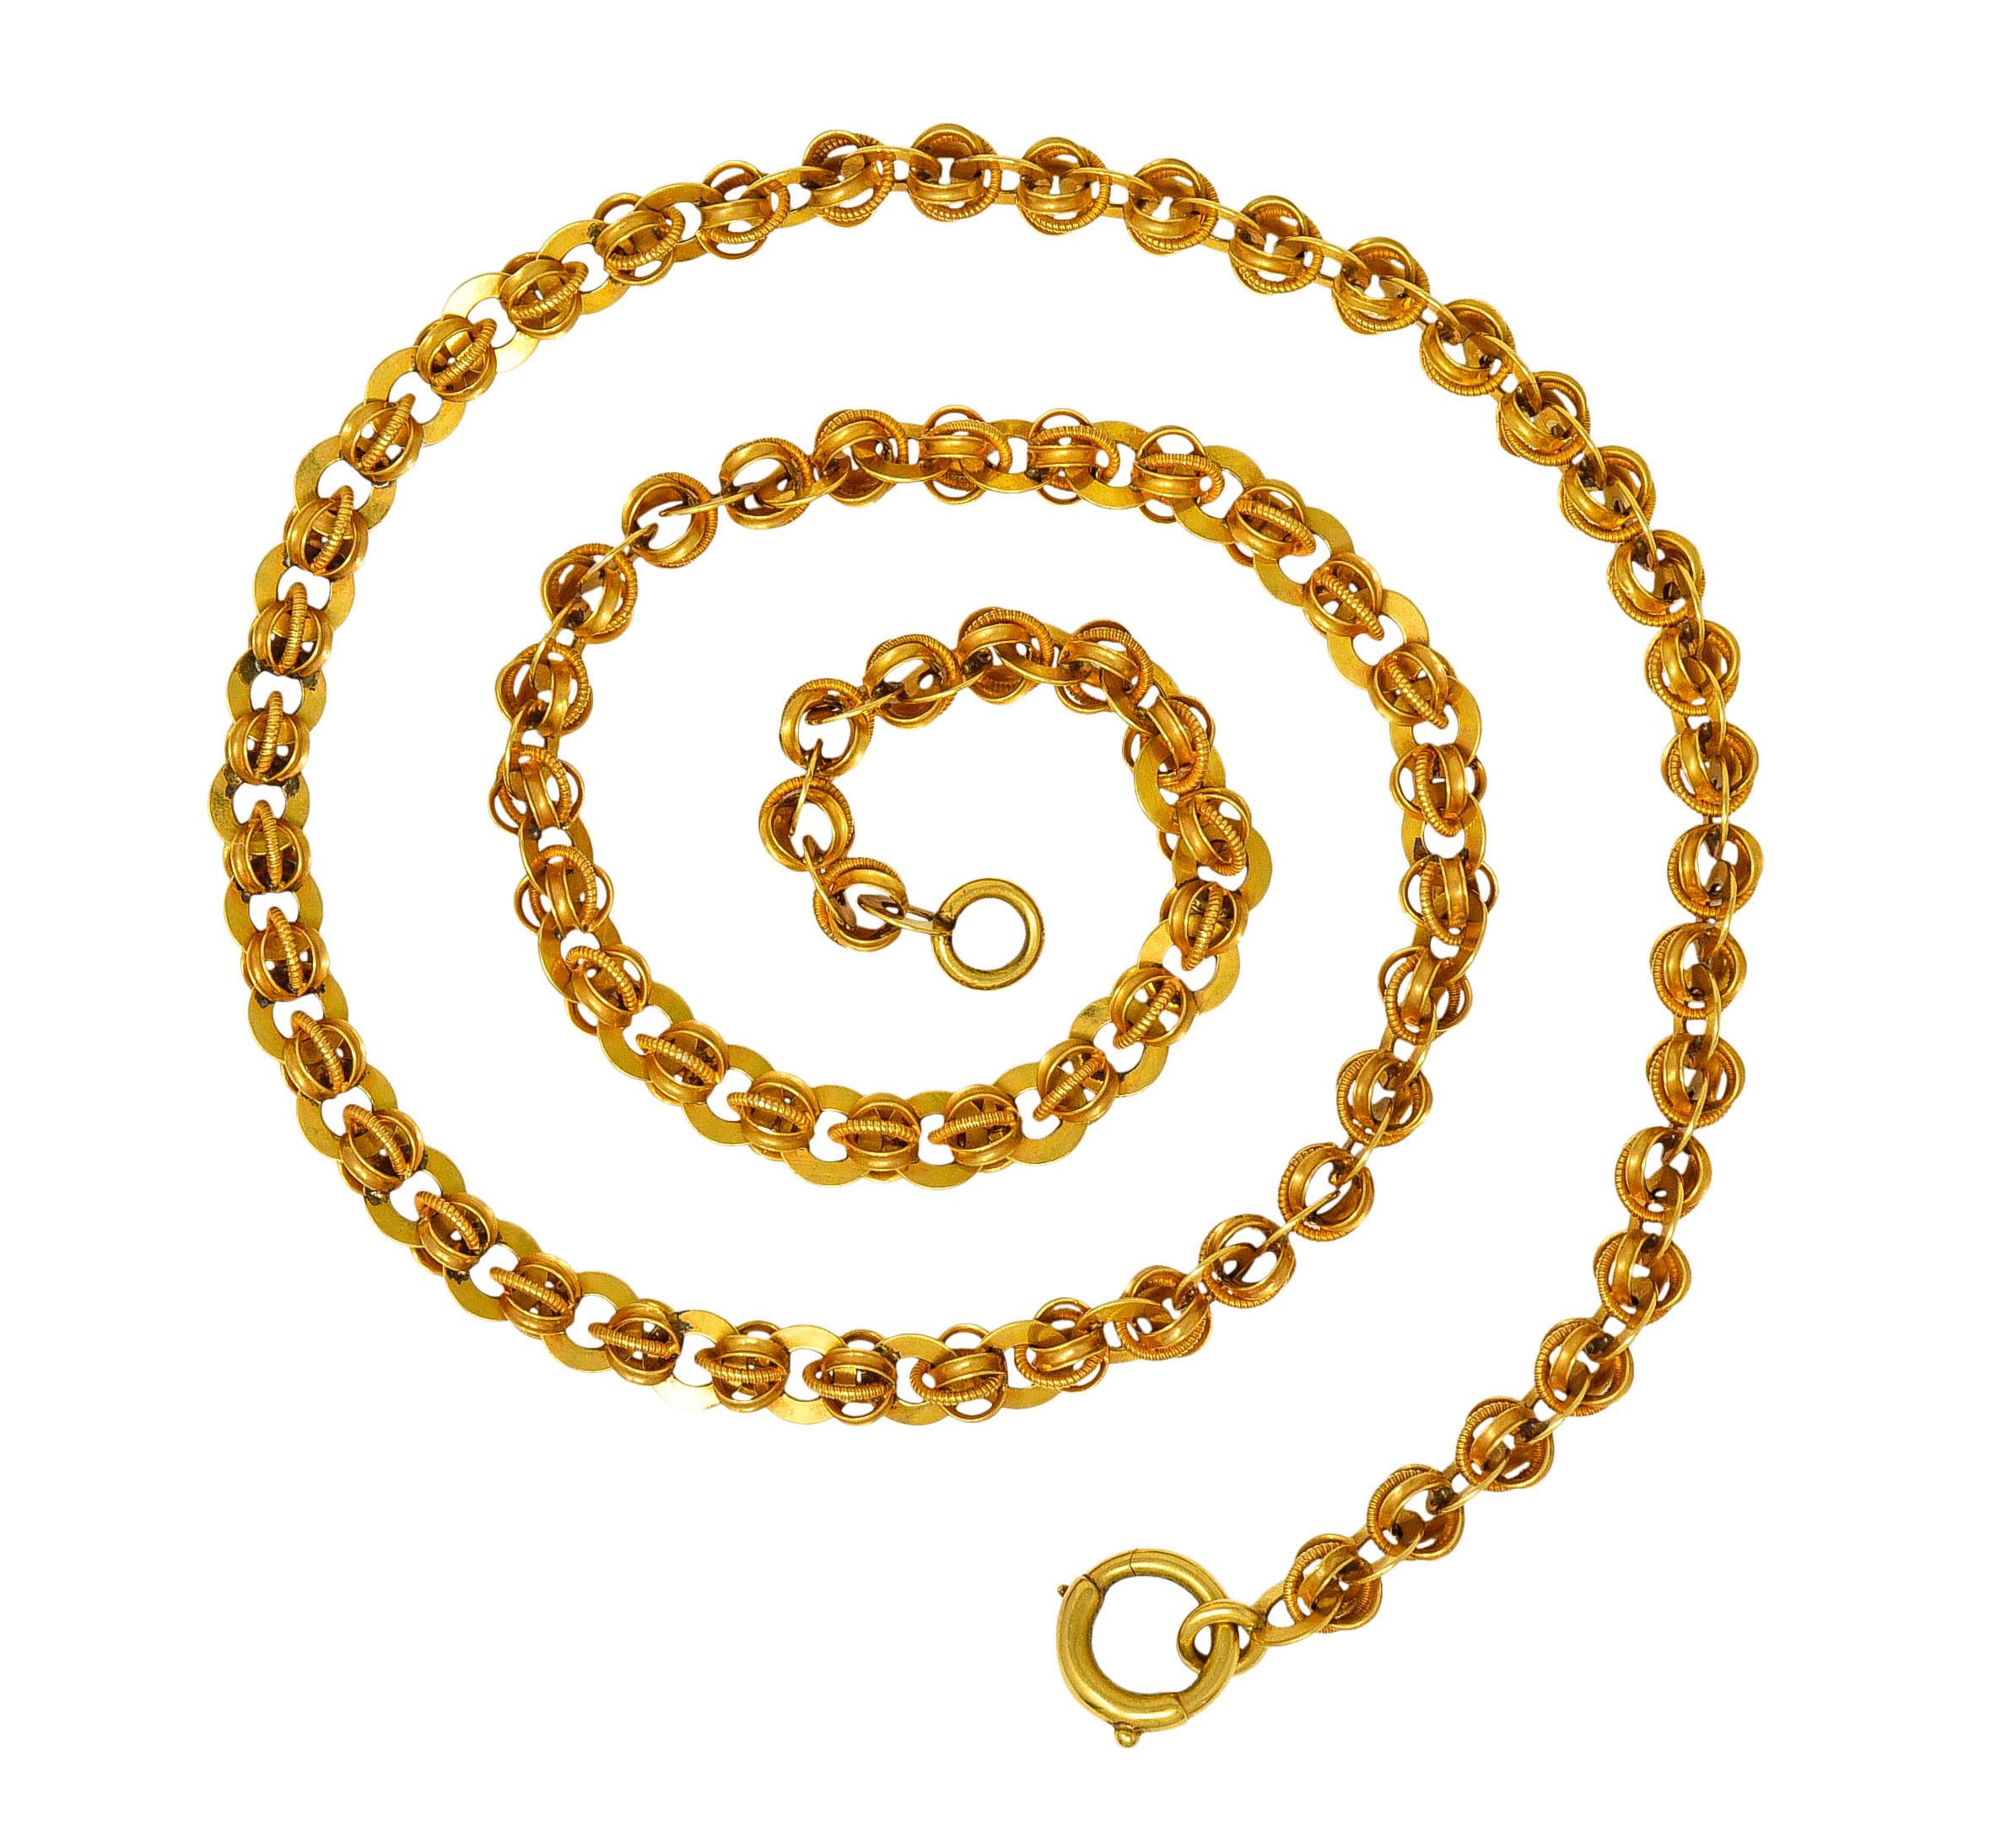 Chain necklace is comprised of triple segmented links with a finely ribbed texture

Alternating with circular spacer link disks

Tested as 14 karat gold

Circa: 1890s

Length: 19 inches

Width: 1/4 inches

Total weight: 21.8 grams

Effortless.